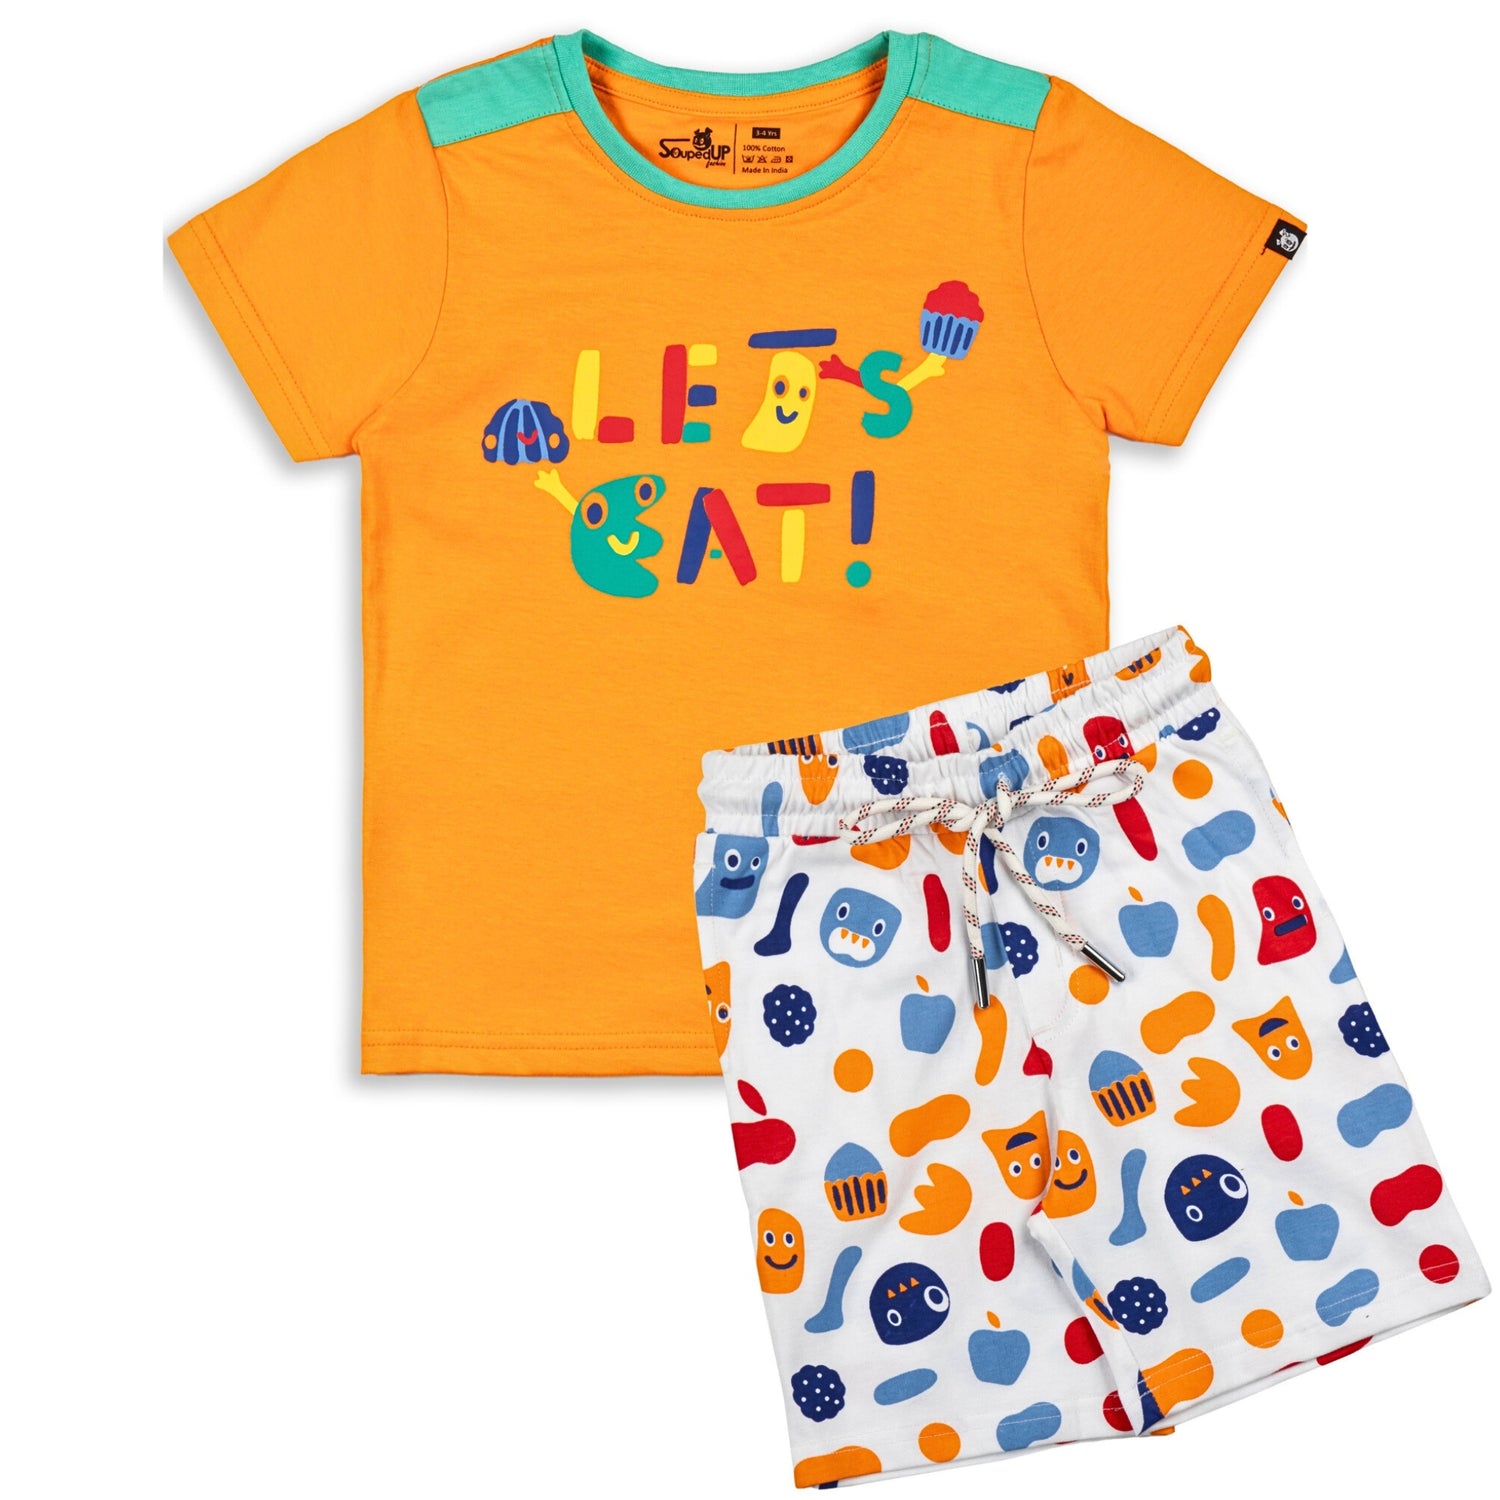 Let's Eat Carrot Orange Printed Boys T-Shirt with White Shorts 2-8 Yrs